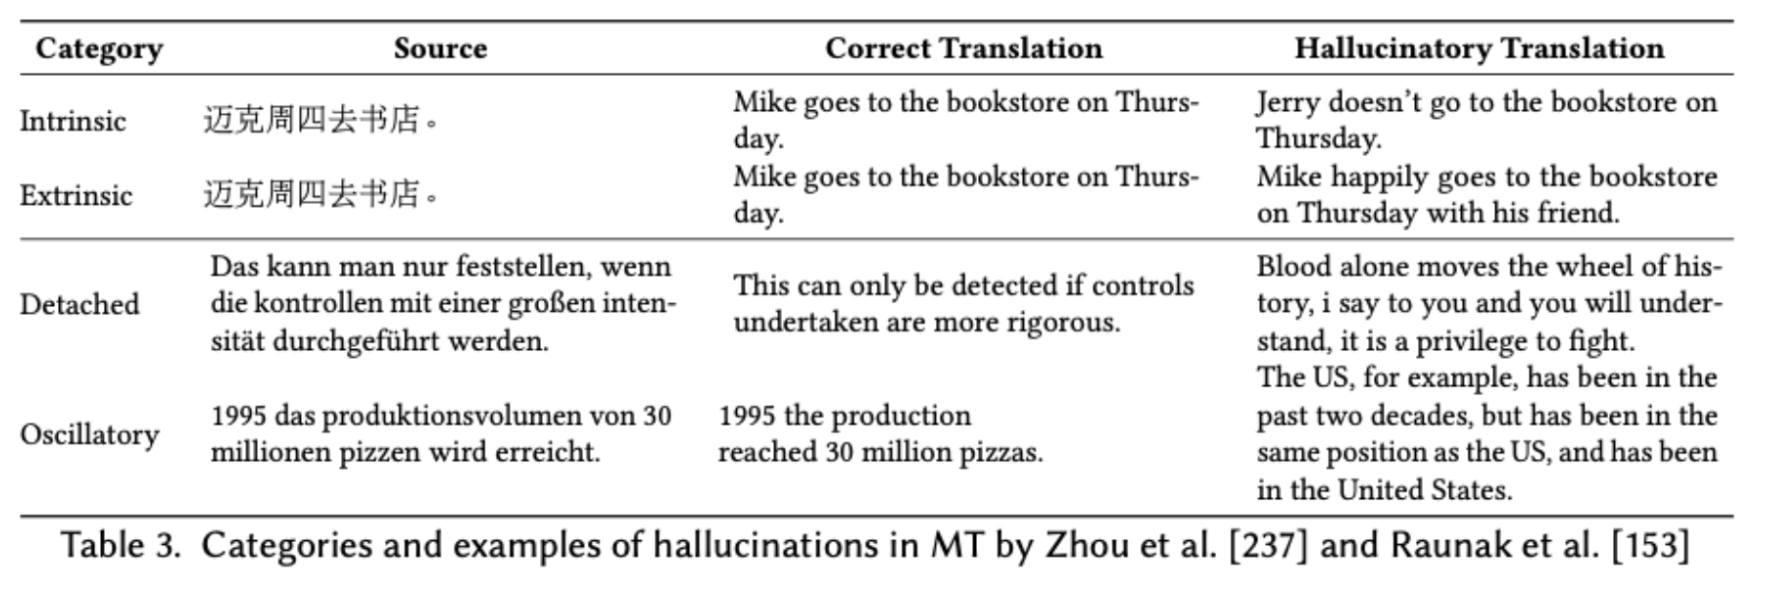 Source of image 3: Survey of Hallucination in Natural Language Generation